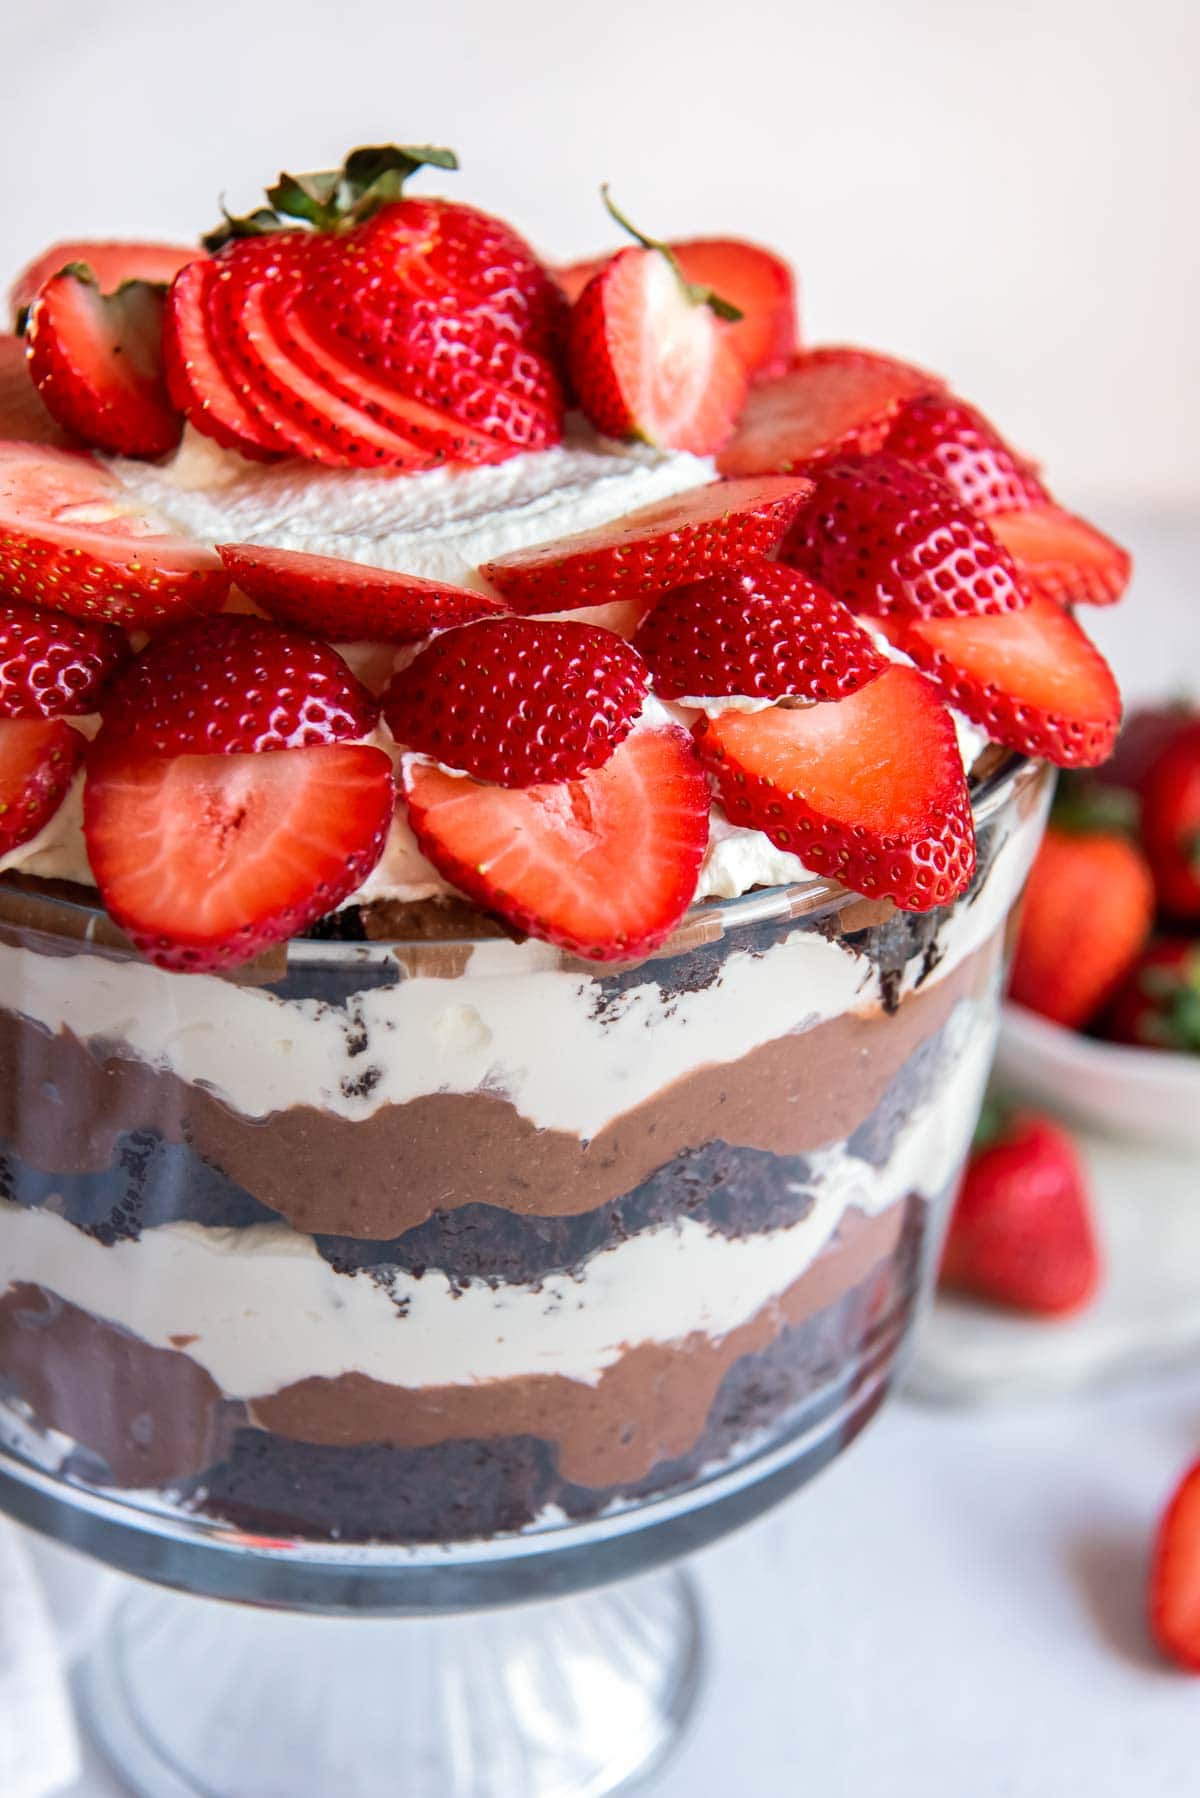 Layers of chocolate cake, chocolate pudding, and whipped cream shown in a trifle bowl and topped with sliced strawberries.